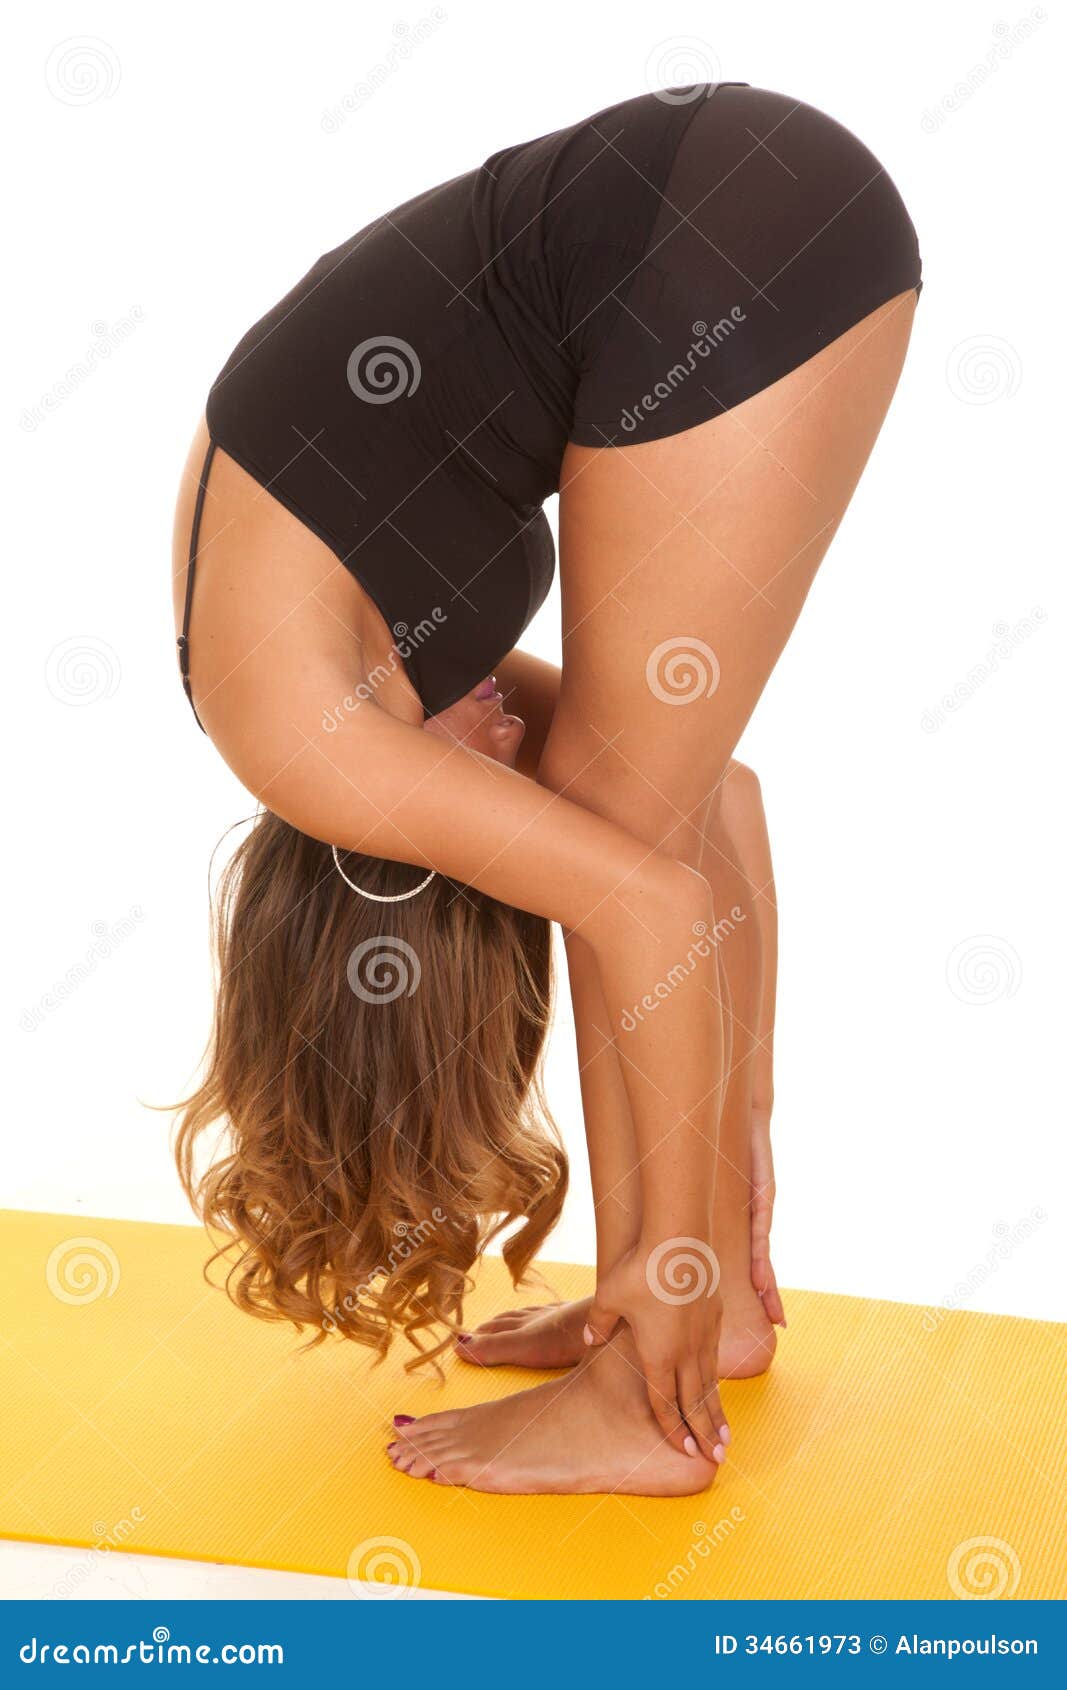 Bend over stretch yoga stock image. Image of body, expression - 34661973